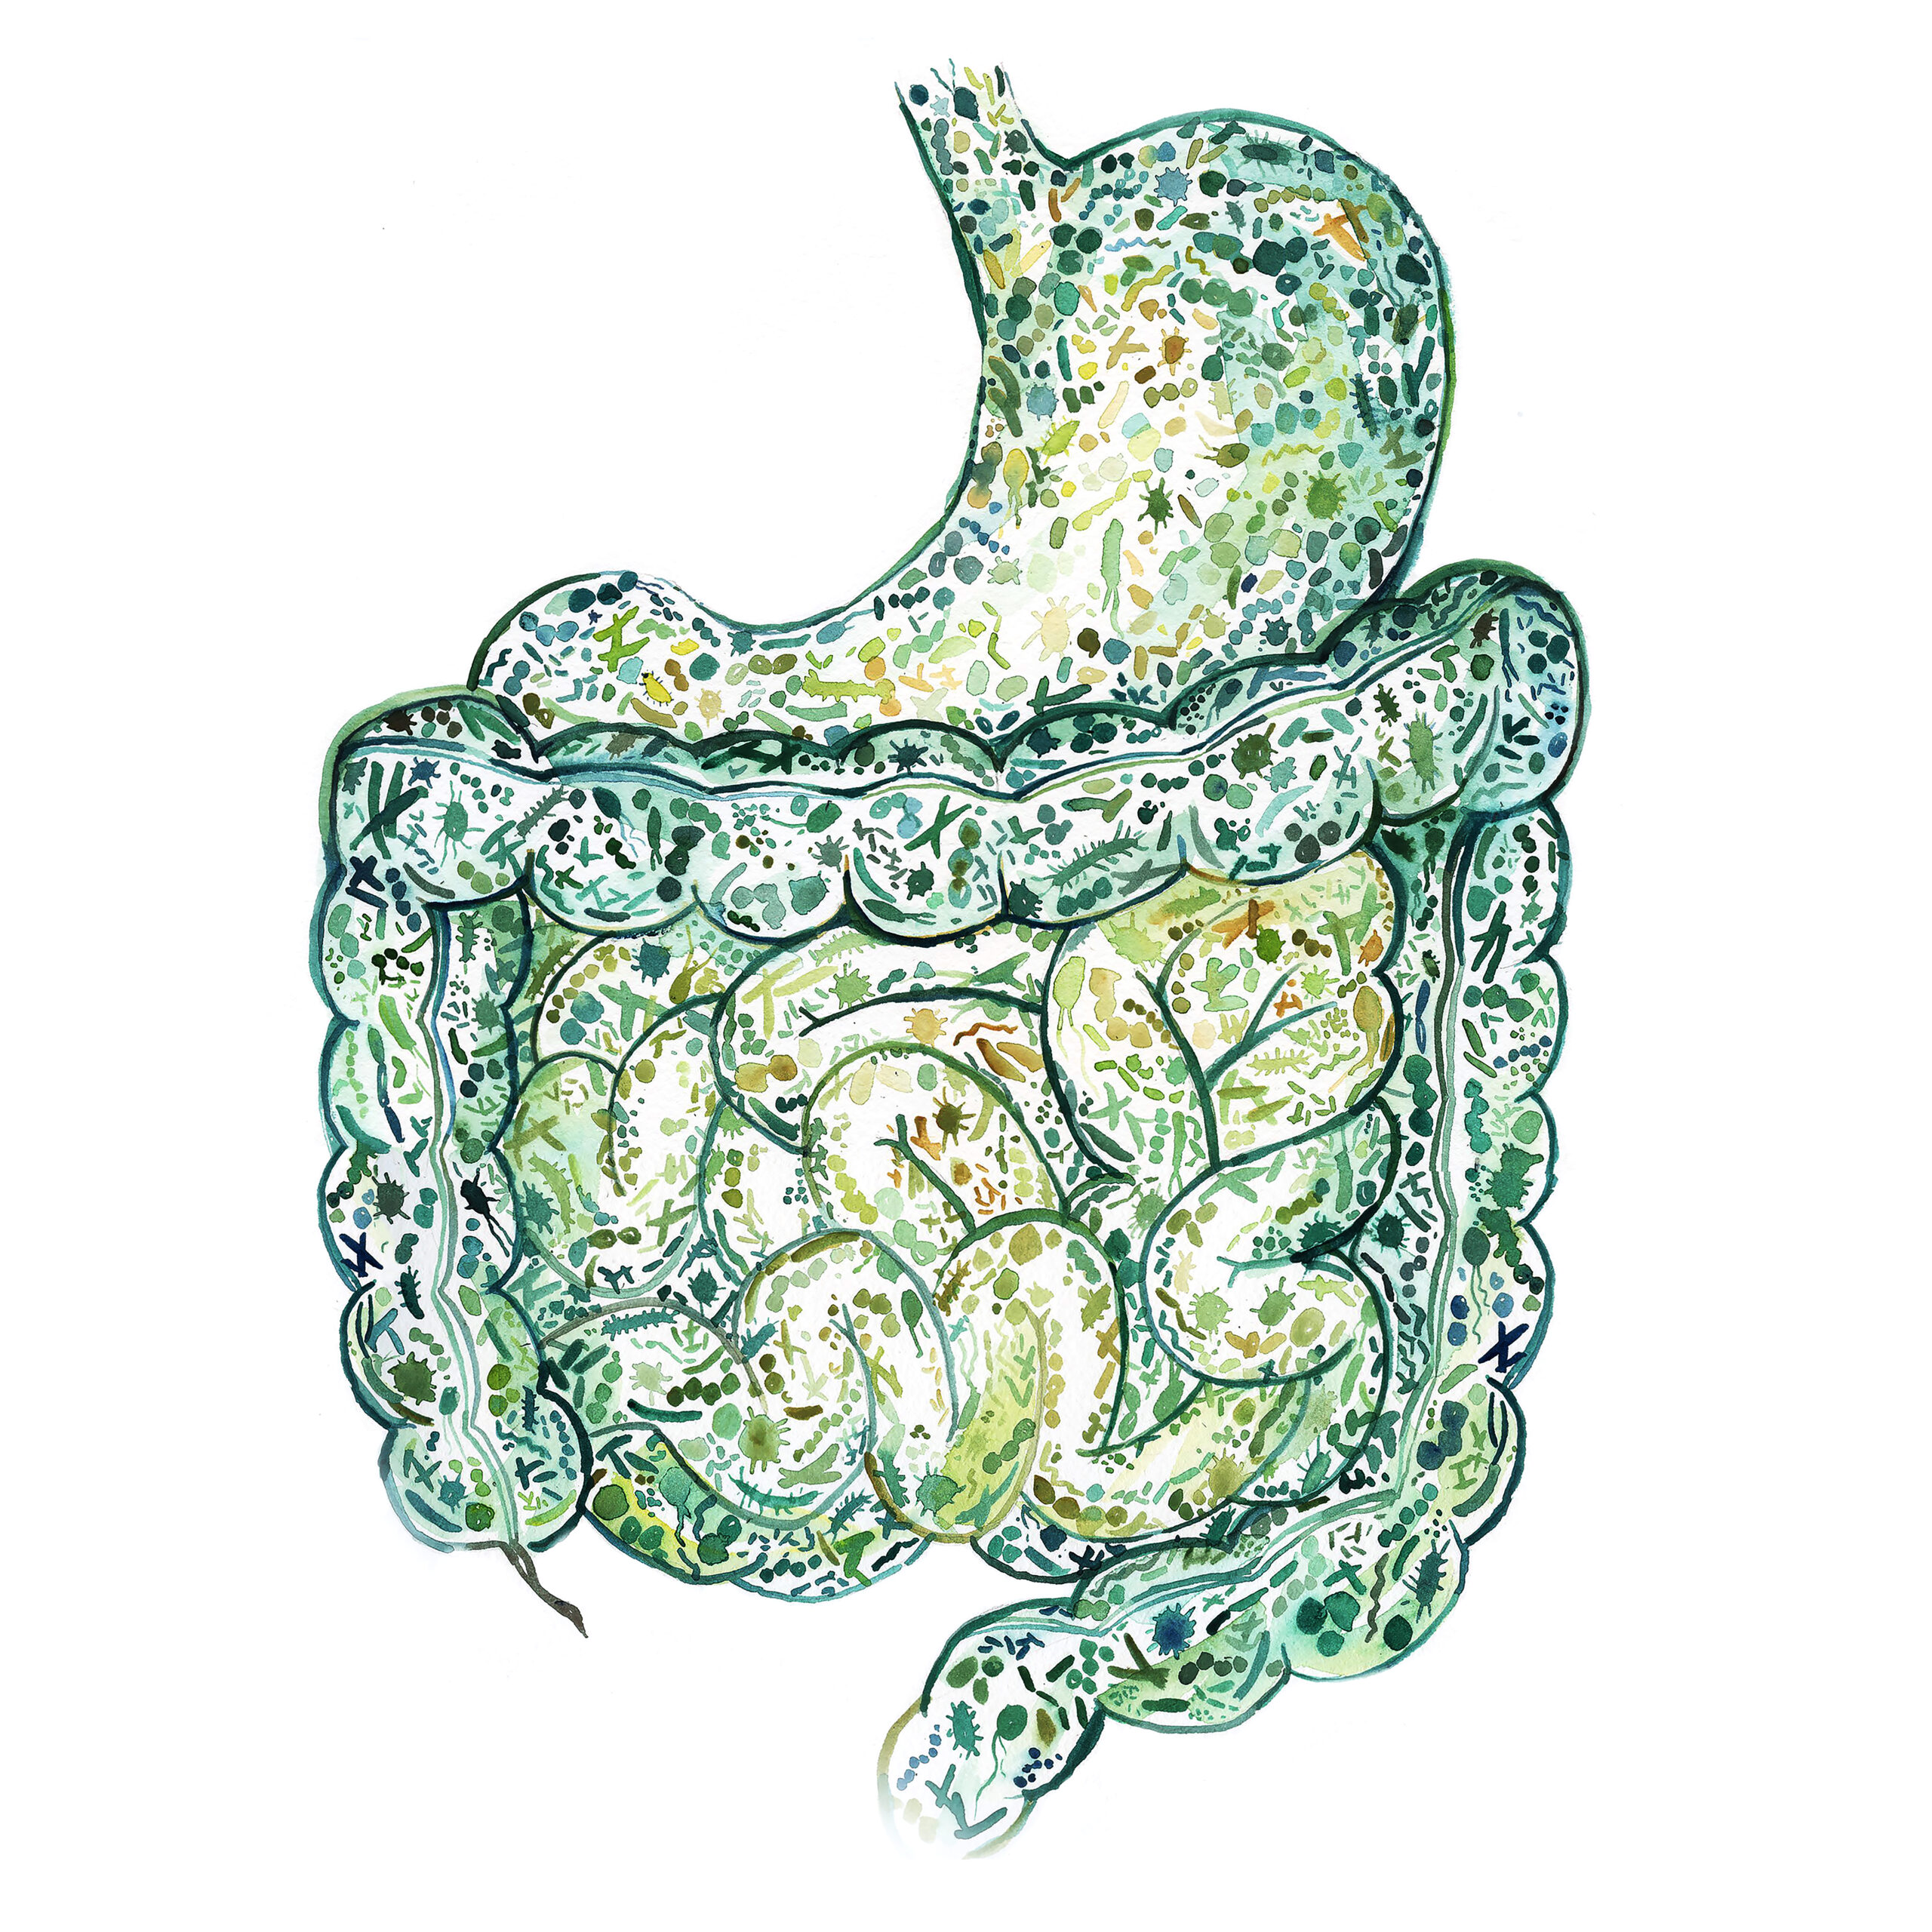 Art image of the gut biome.